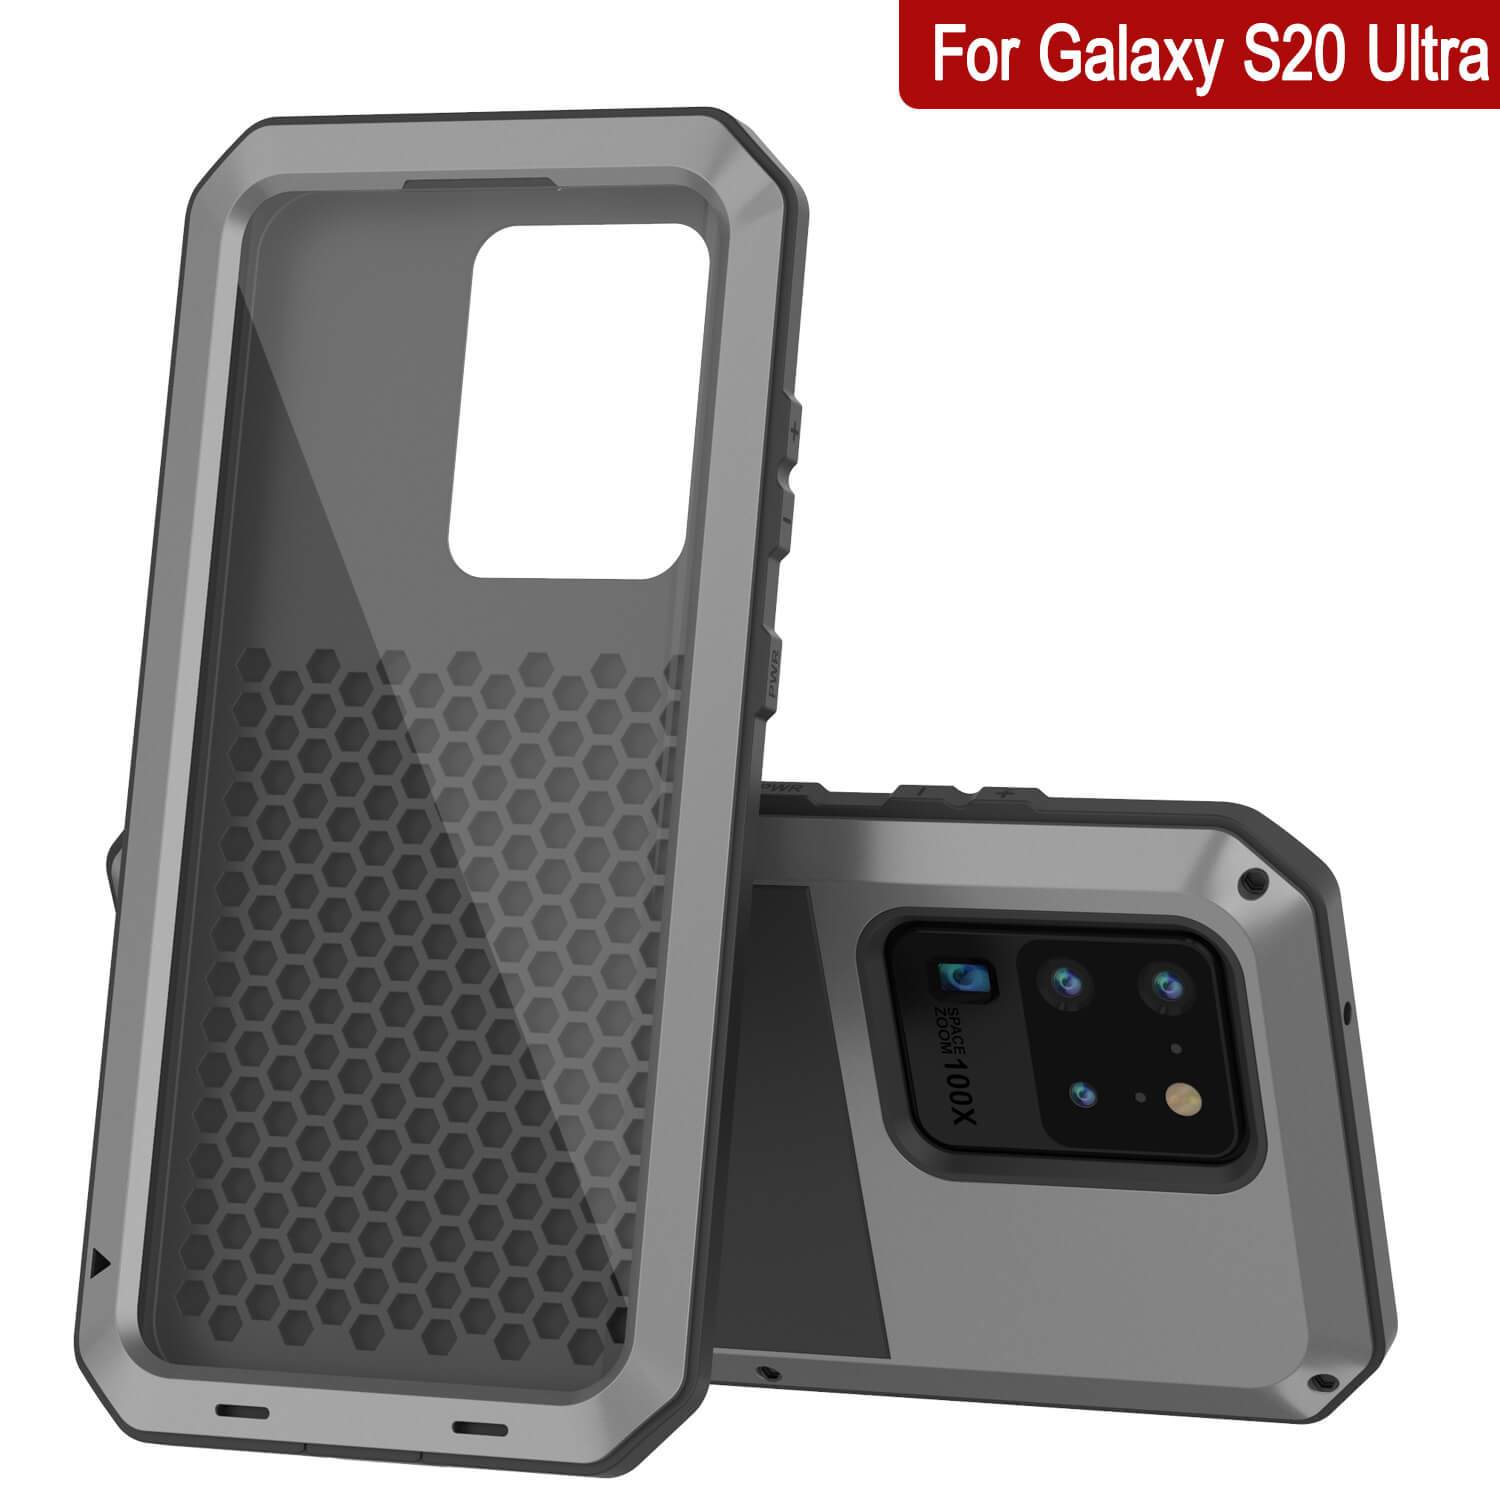 Galaxy S20 Ultra Metal Case, Heavy Duty Military Grade Rugged Armor Cover [Silver]